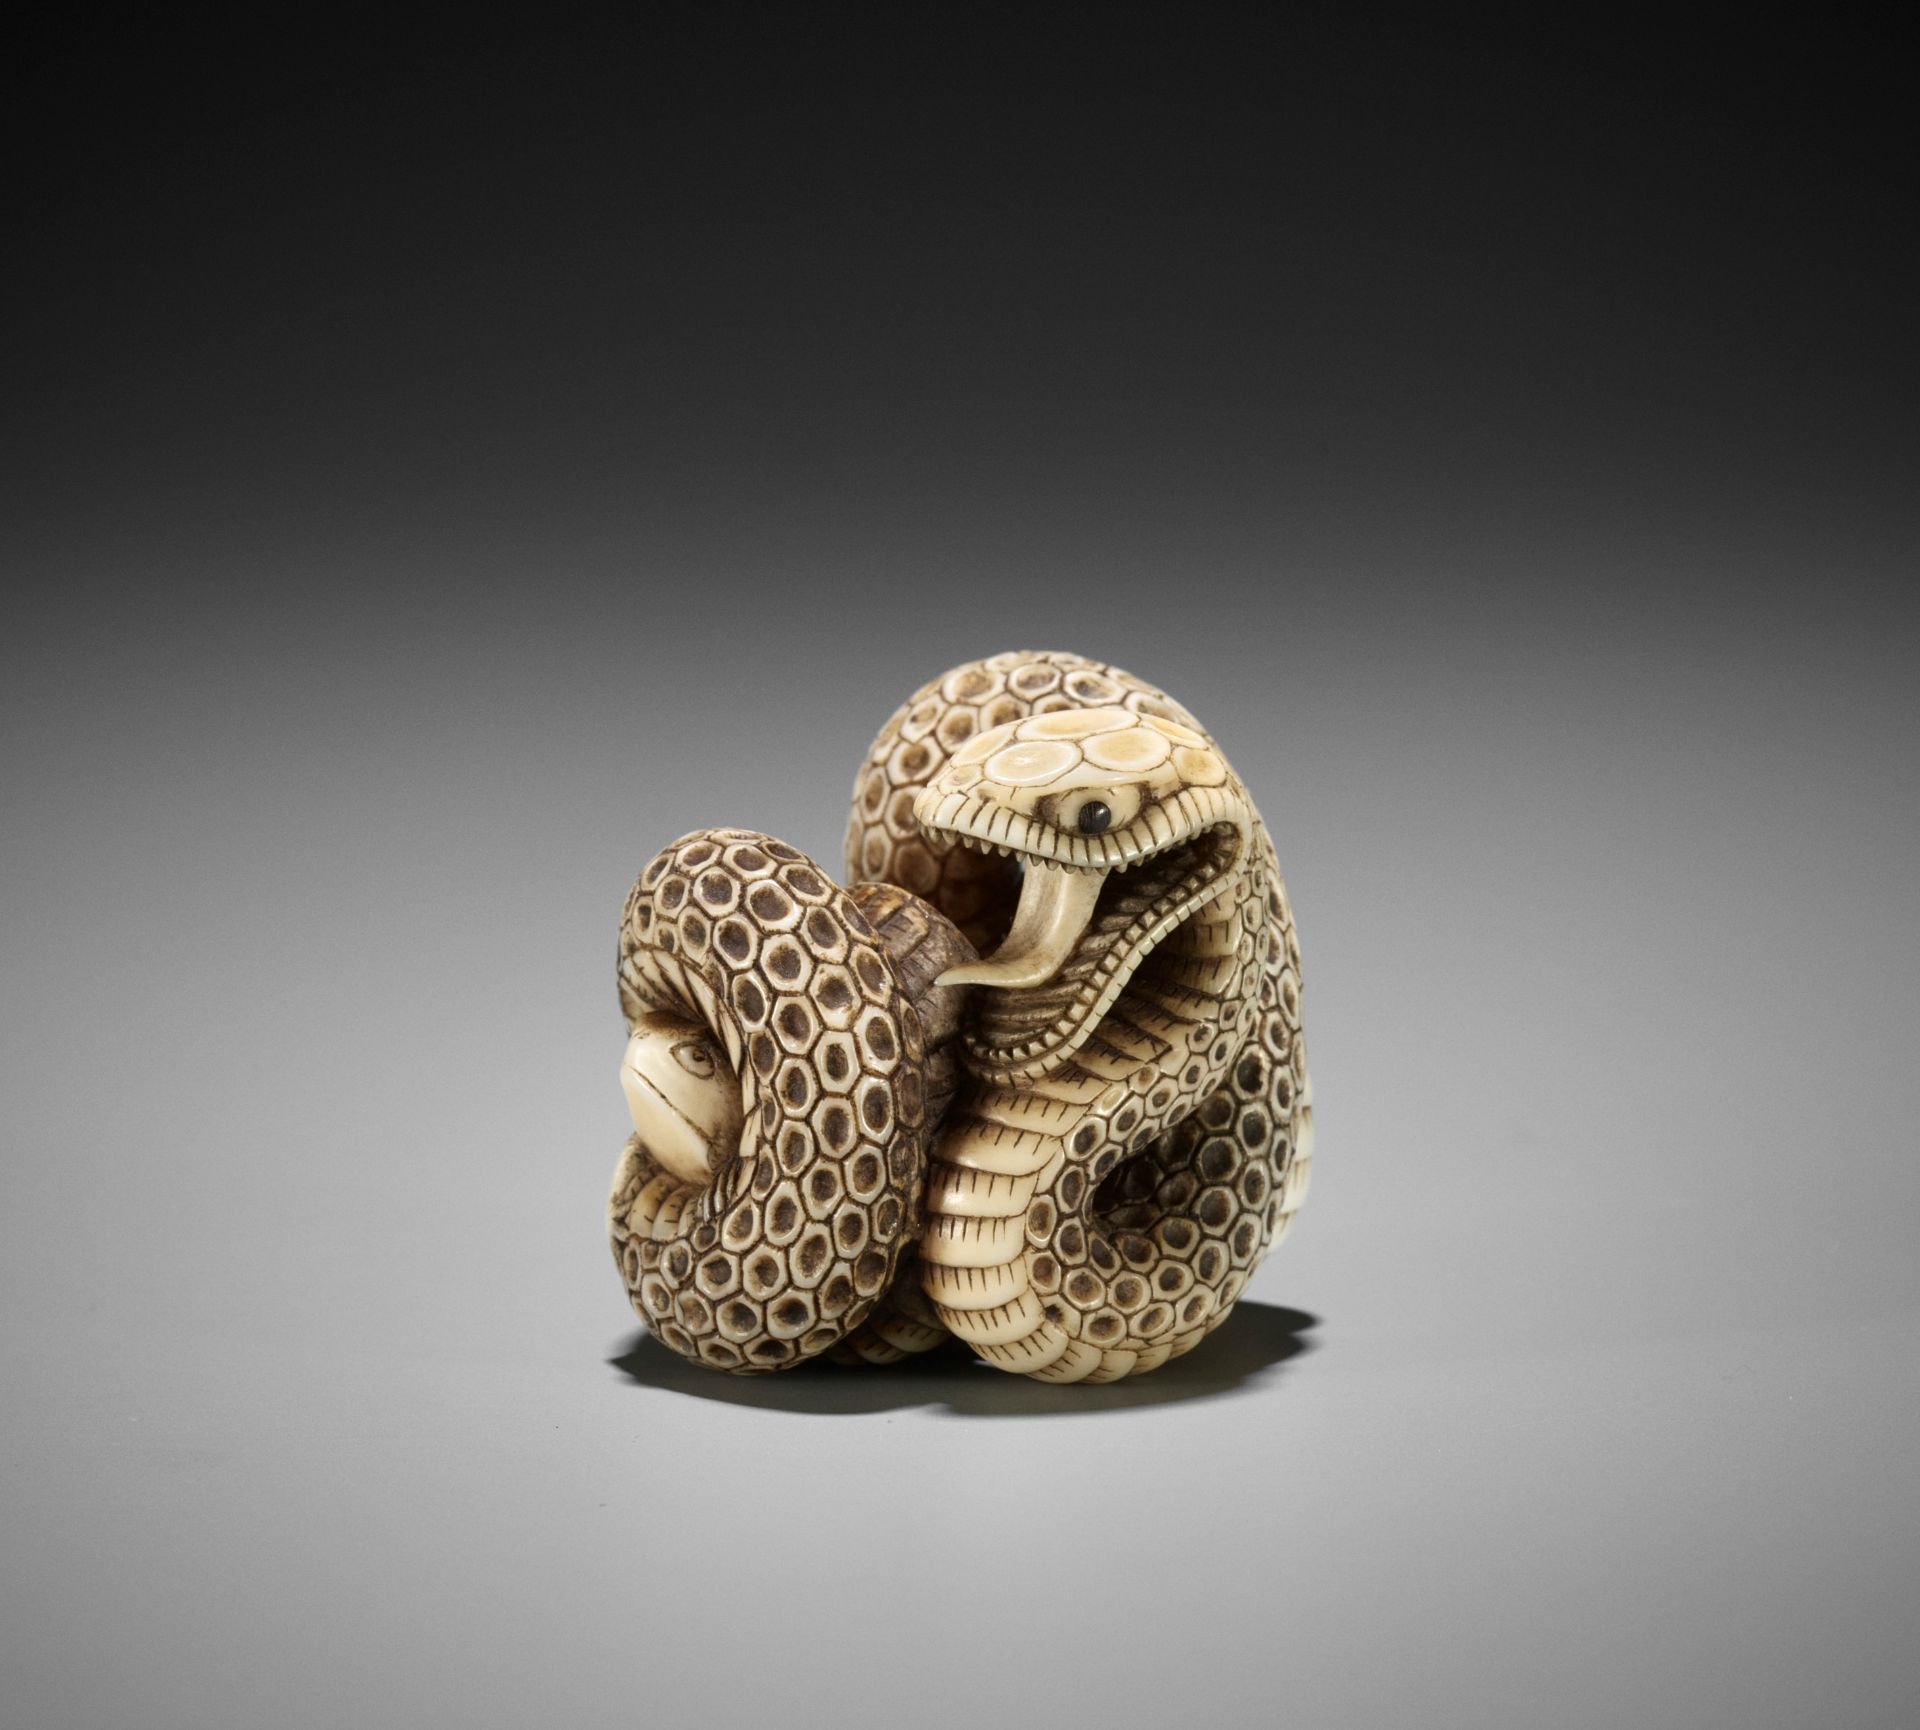 A SUPERB IVORY NETSUKE OF A SNAKE PREYING ON A FROG, ATTRIBUTED TO MASATSUGU